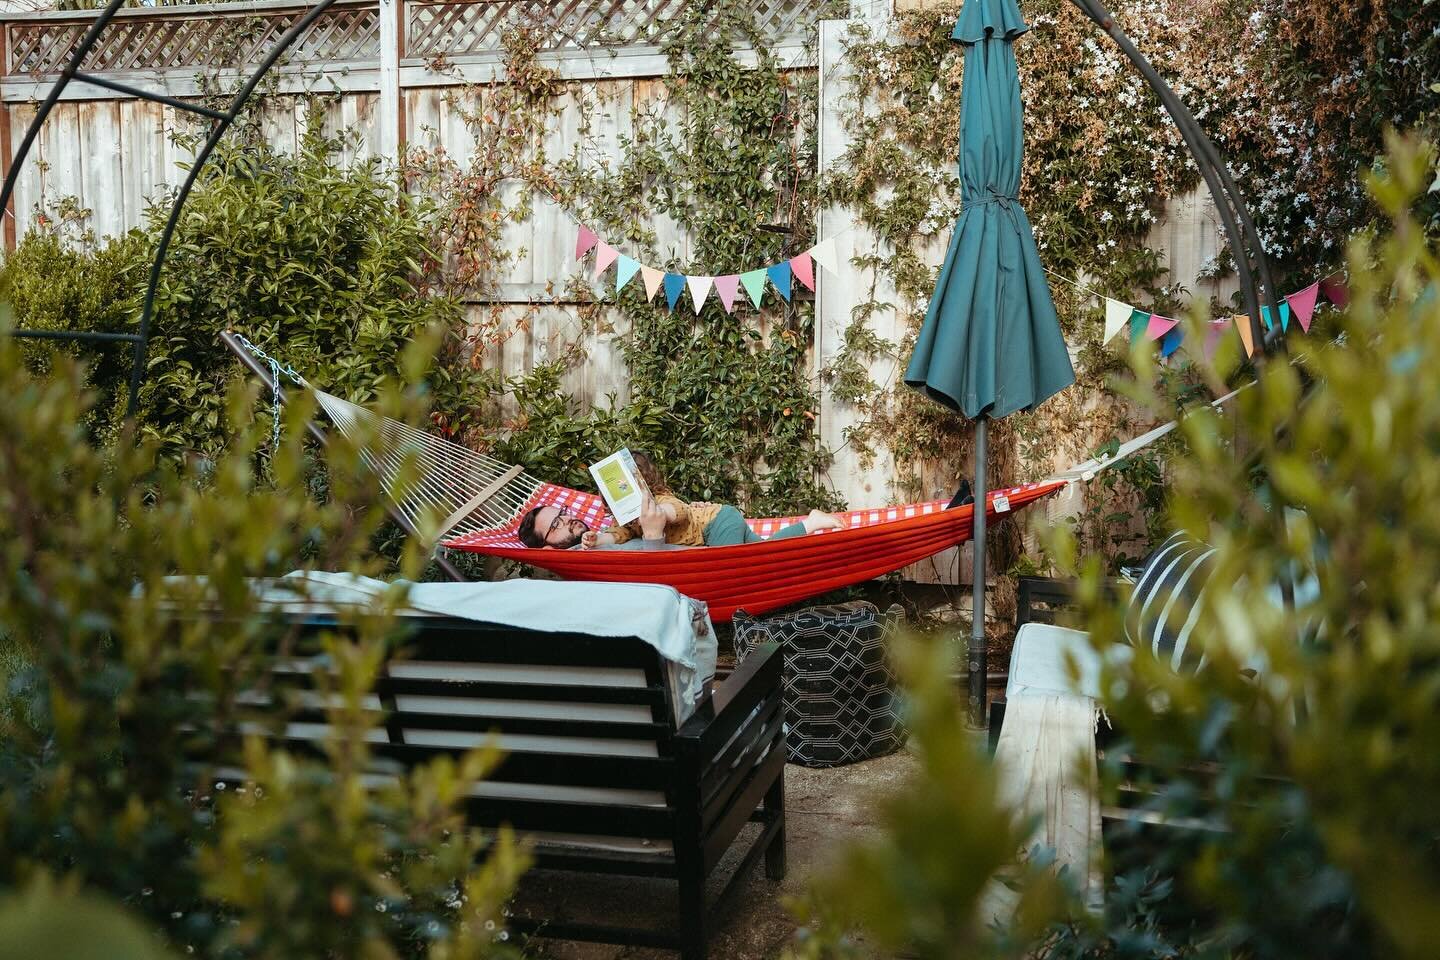 Can officially confirm we&rsquo;re hammock people. 

Frame from @loweshomeimprovement and hammock from @goldenyarrowgoods - they&rsquo;re bother perfect!
AD #lowespartner #lowesproject